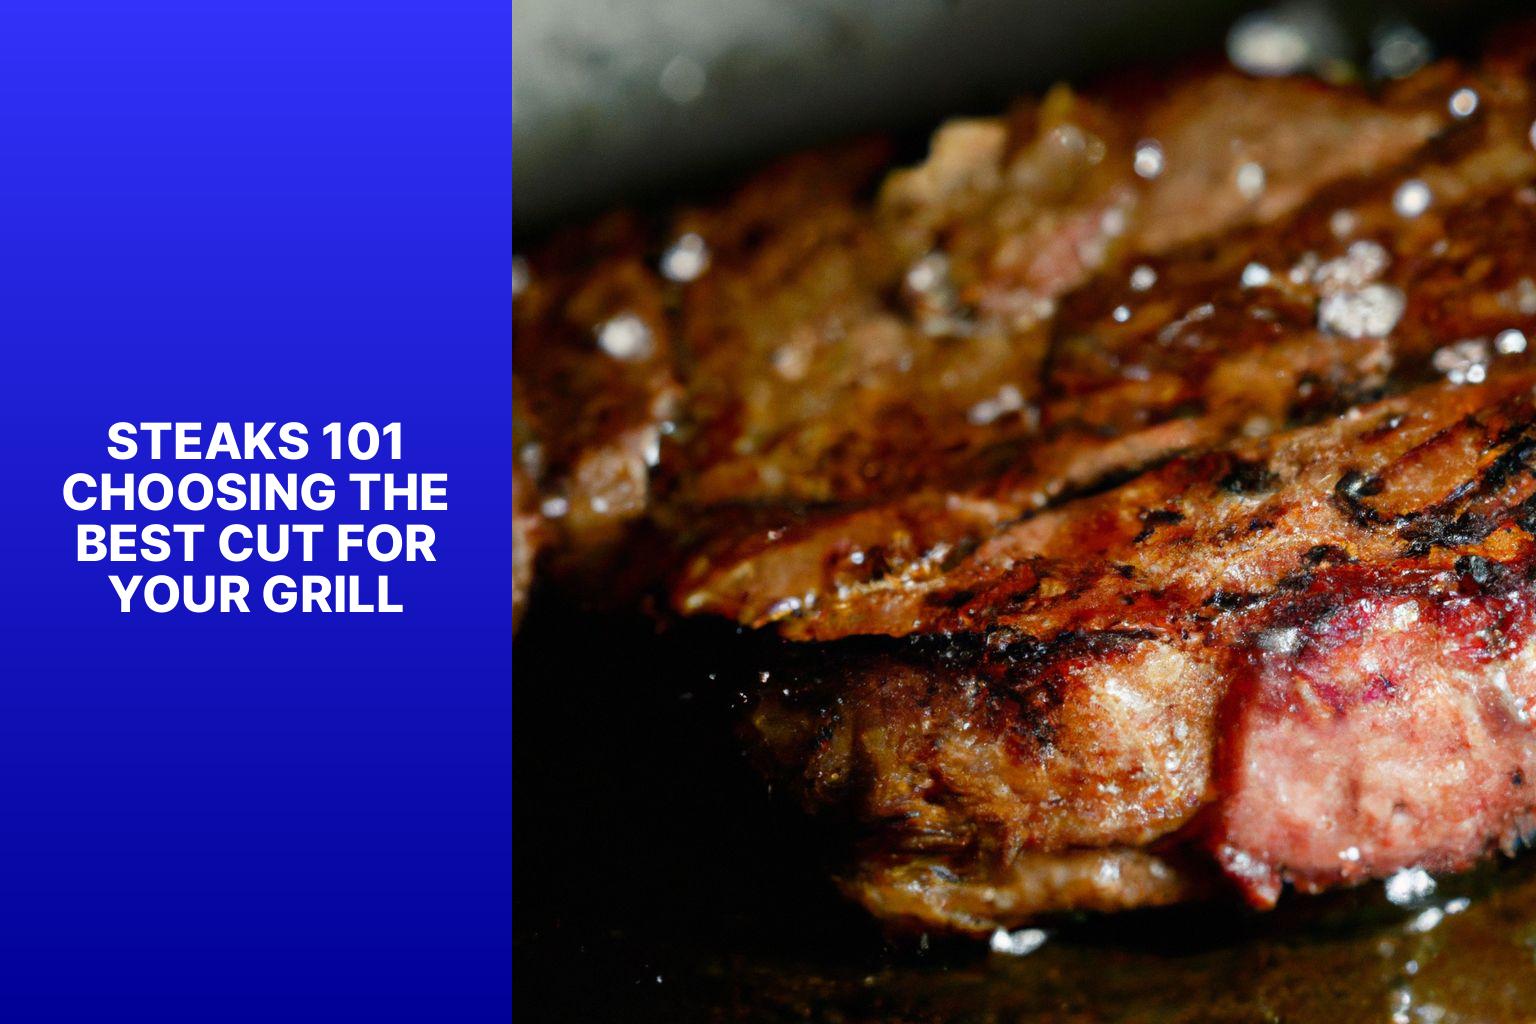 Steaks 101: Choosing the Best Cut for Your Grill